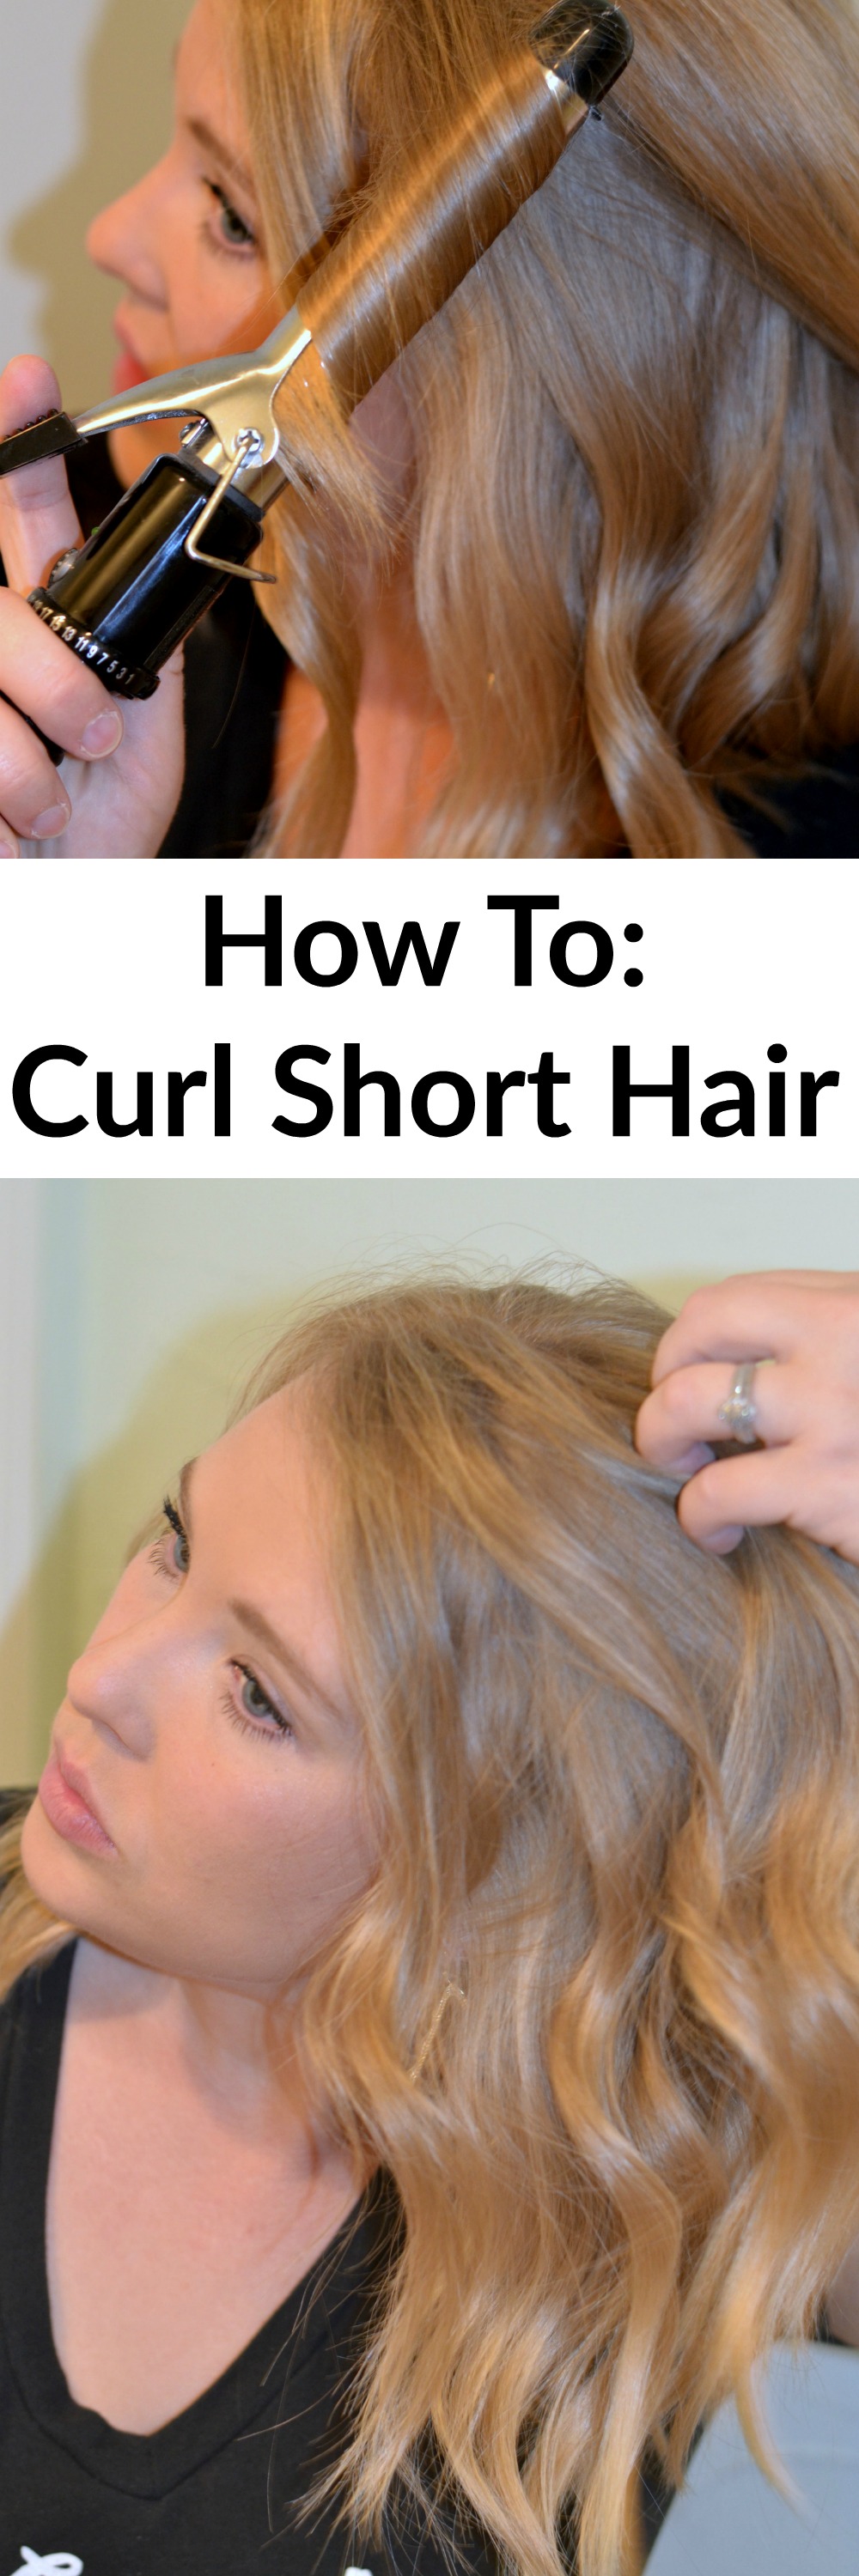 How to Curl Short Hair- This tutorial is simple and easy to follow